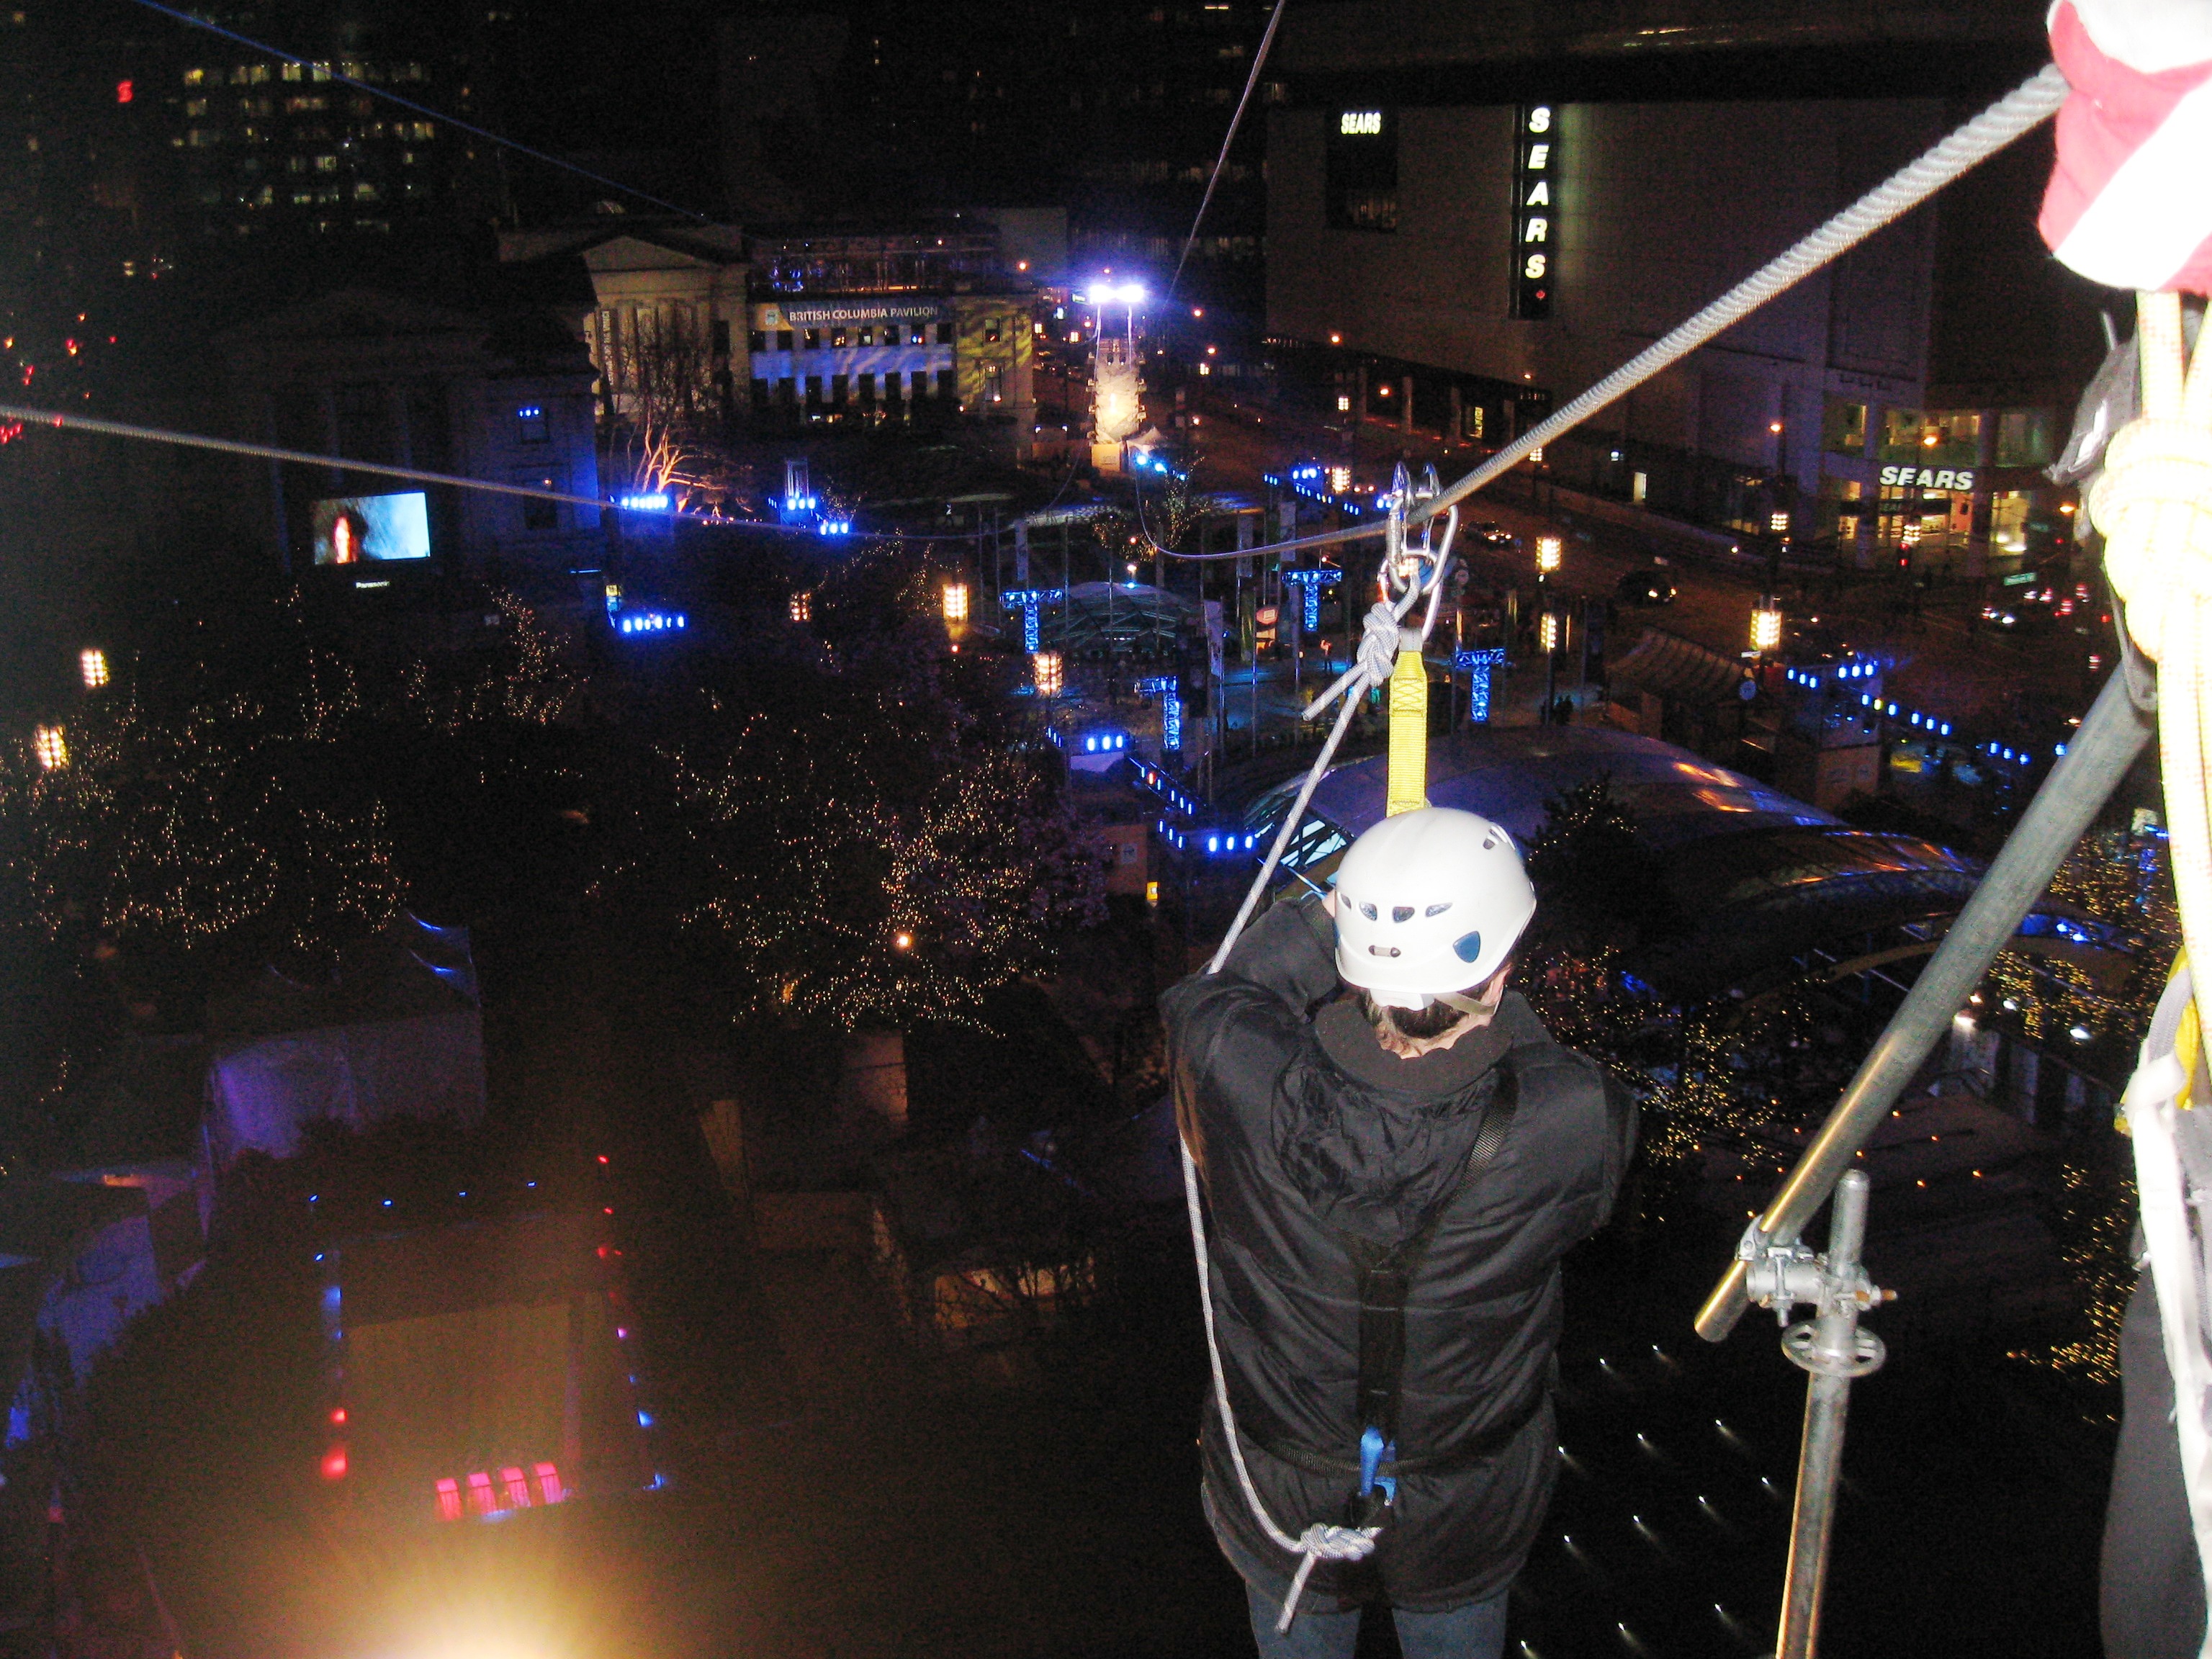 Shawn ziplining over Vancouver